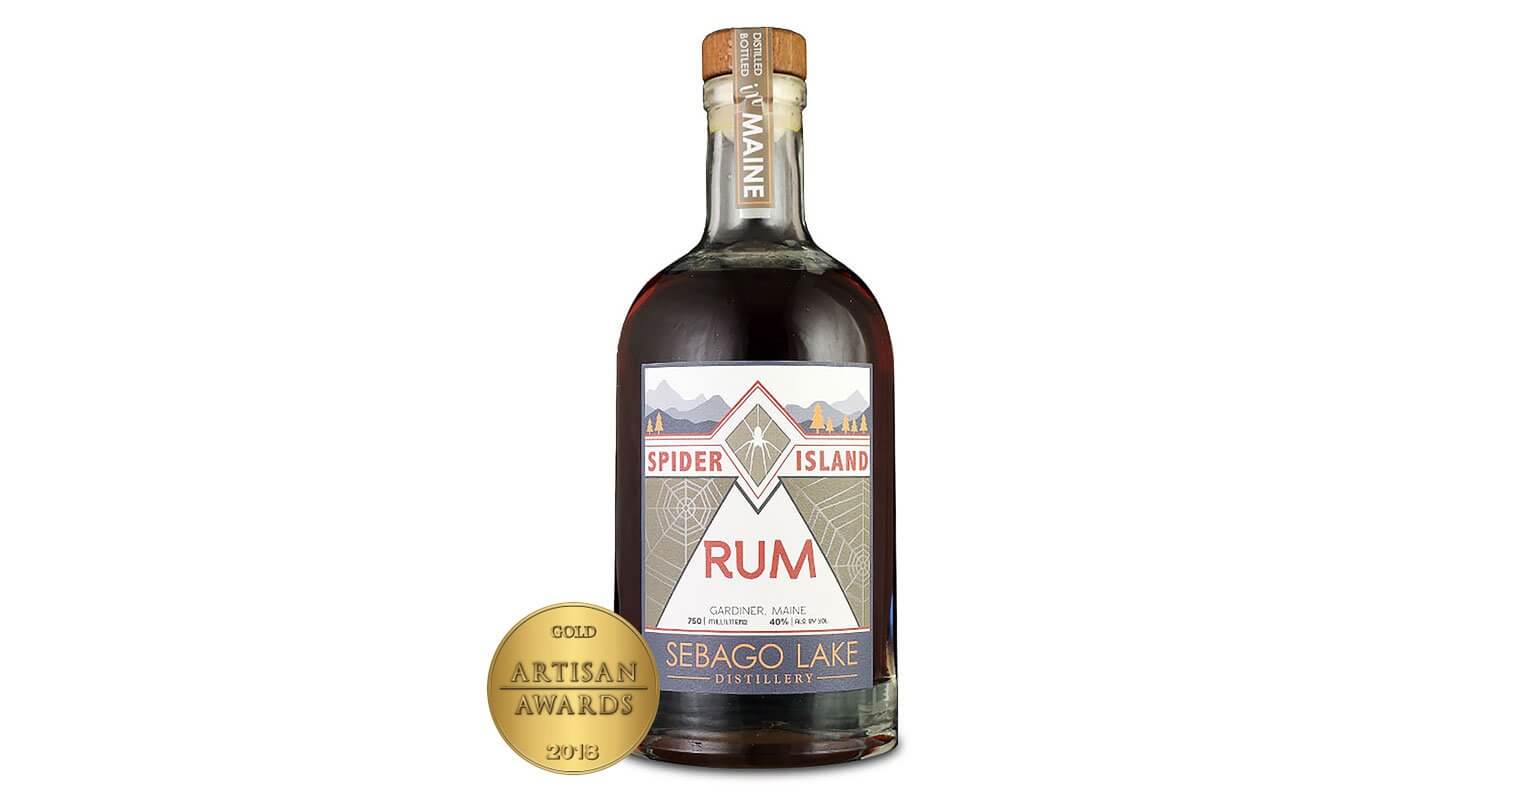 Spider Island Rum, bottle with award on white, featured image